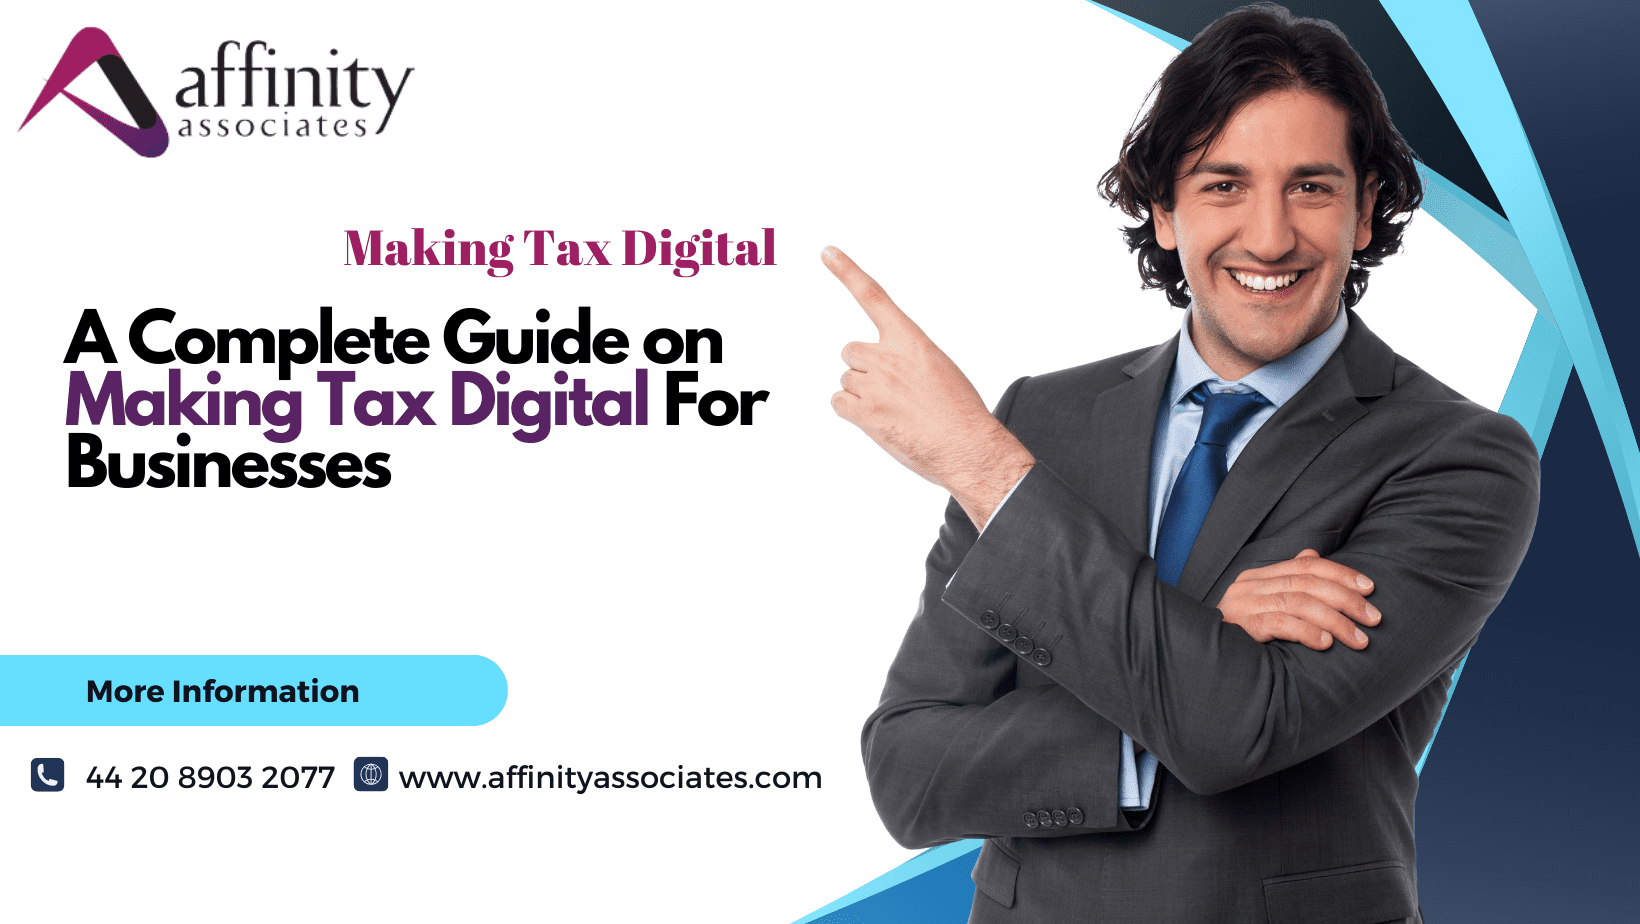 A Complete Guide on Making Tax Digital (MTD) For Businesses